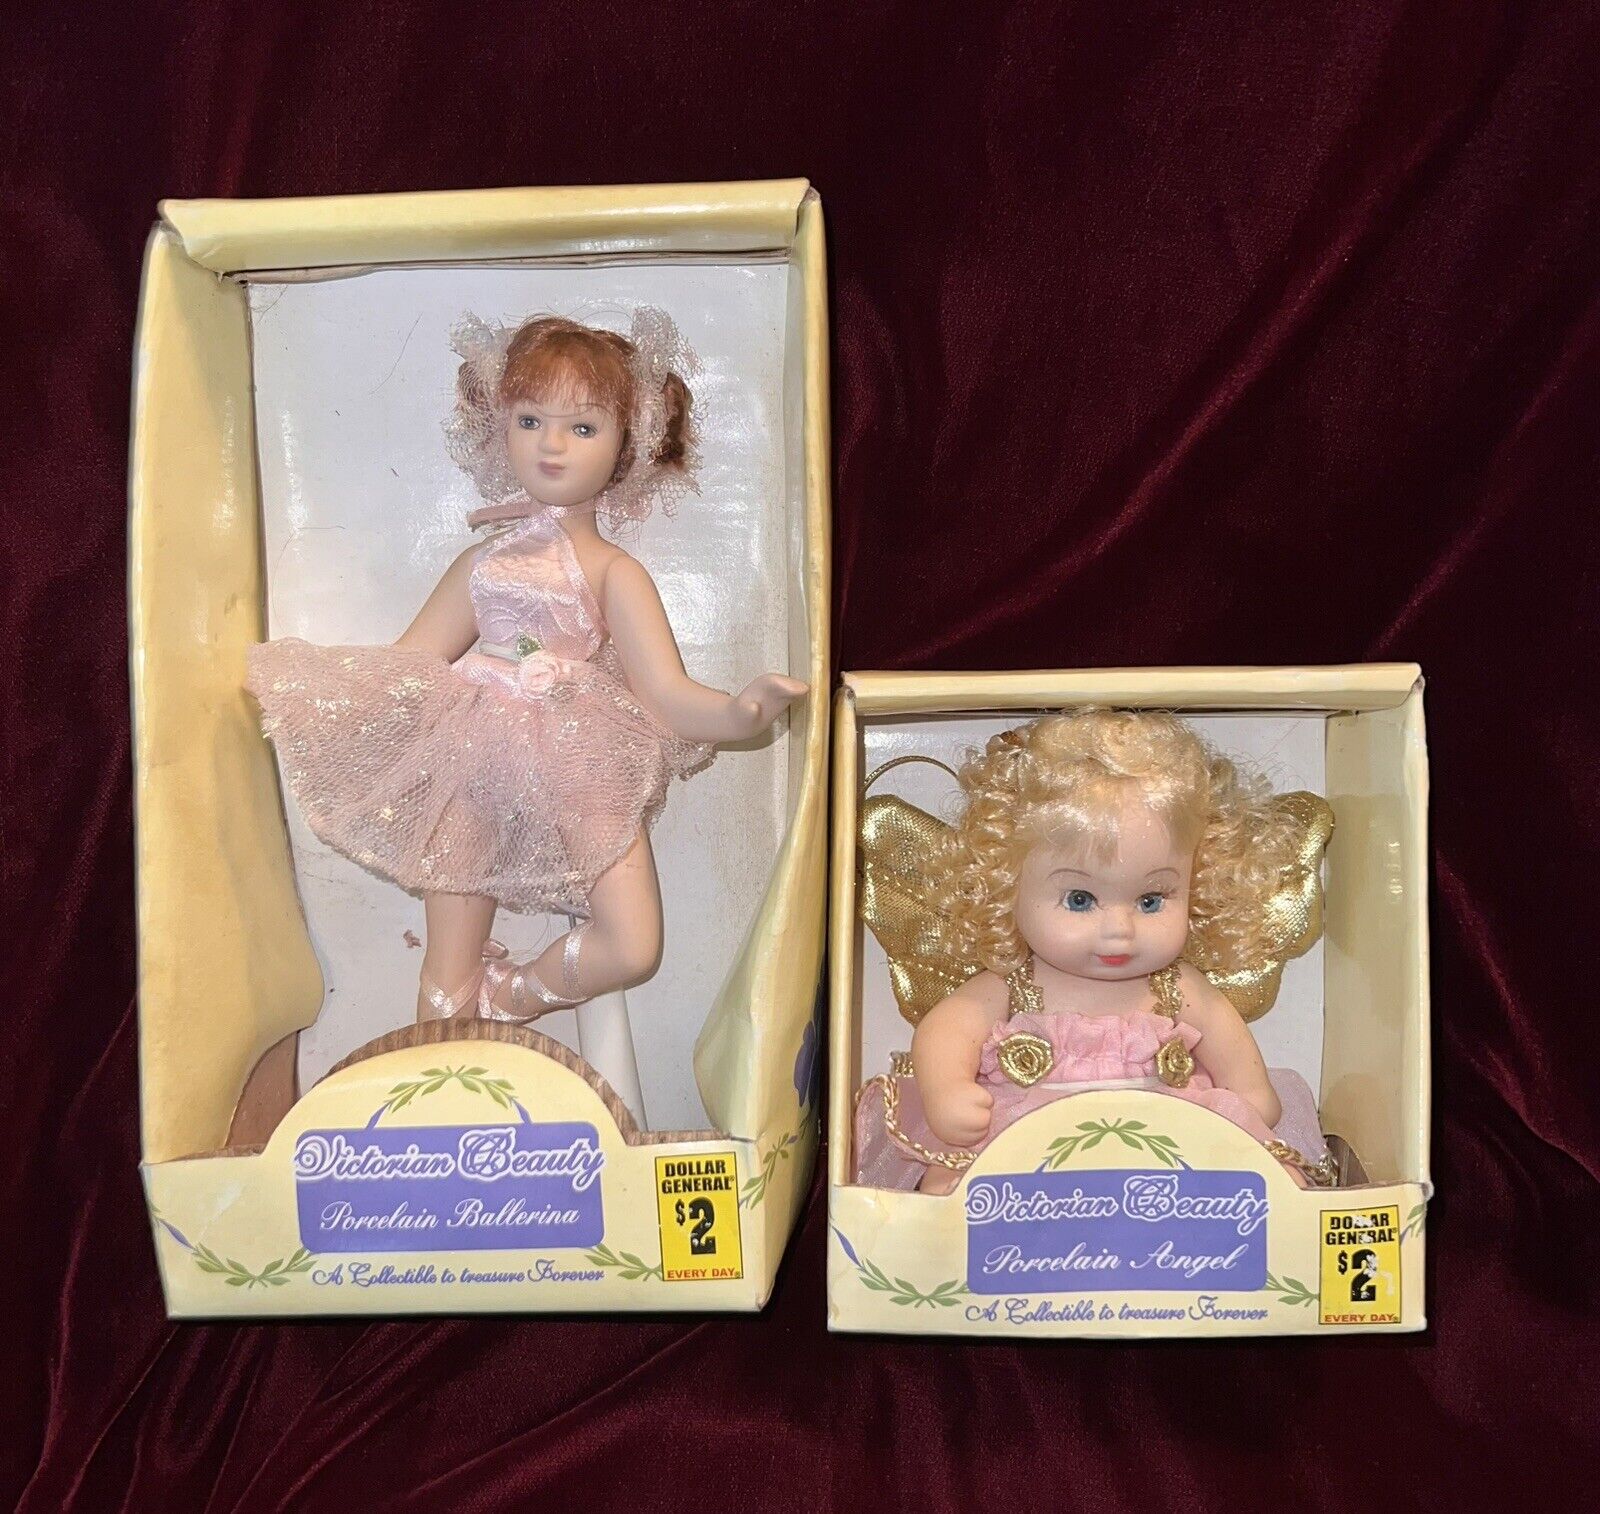 ”Victorian Beauty” Porcelain Ballerina/Angel Doll 6” Collectable